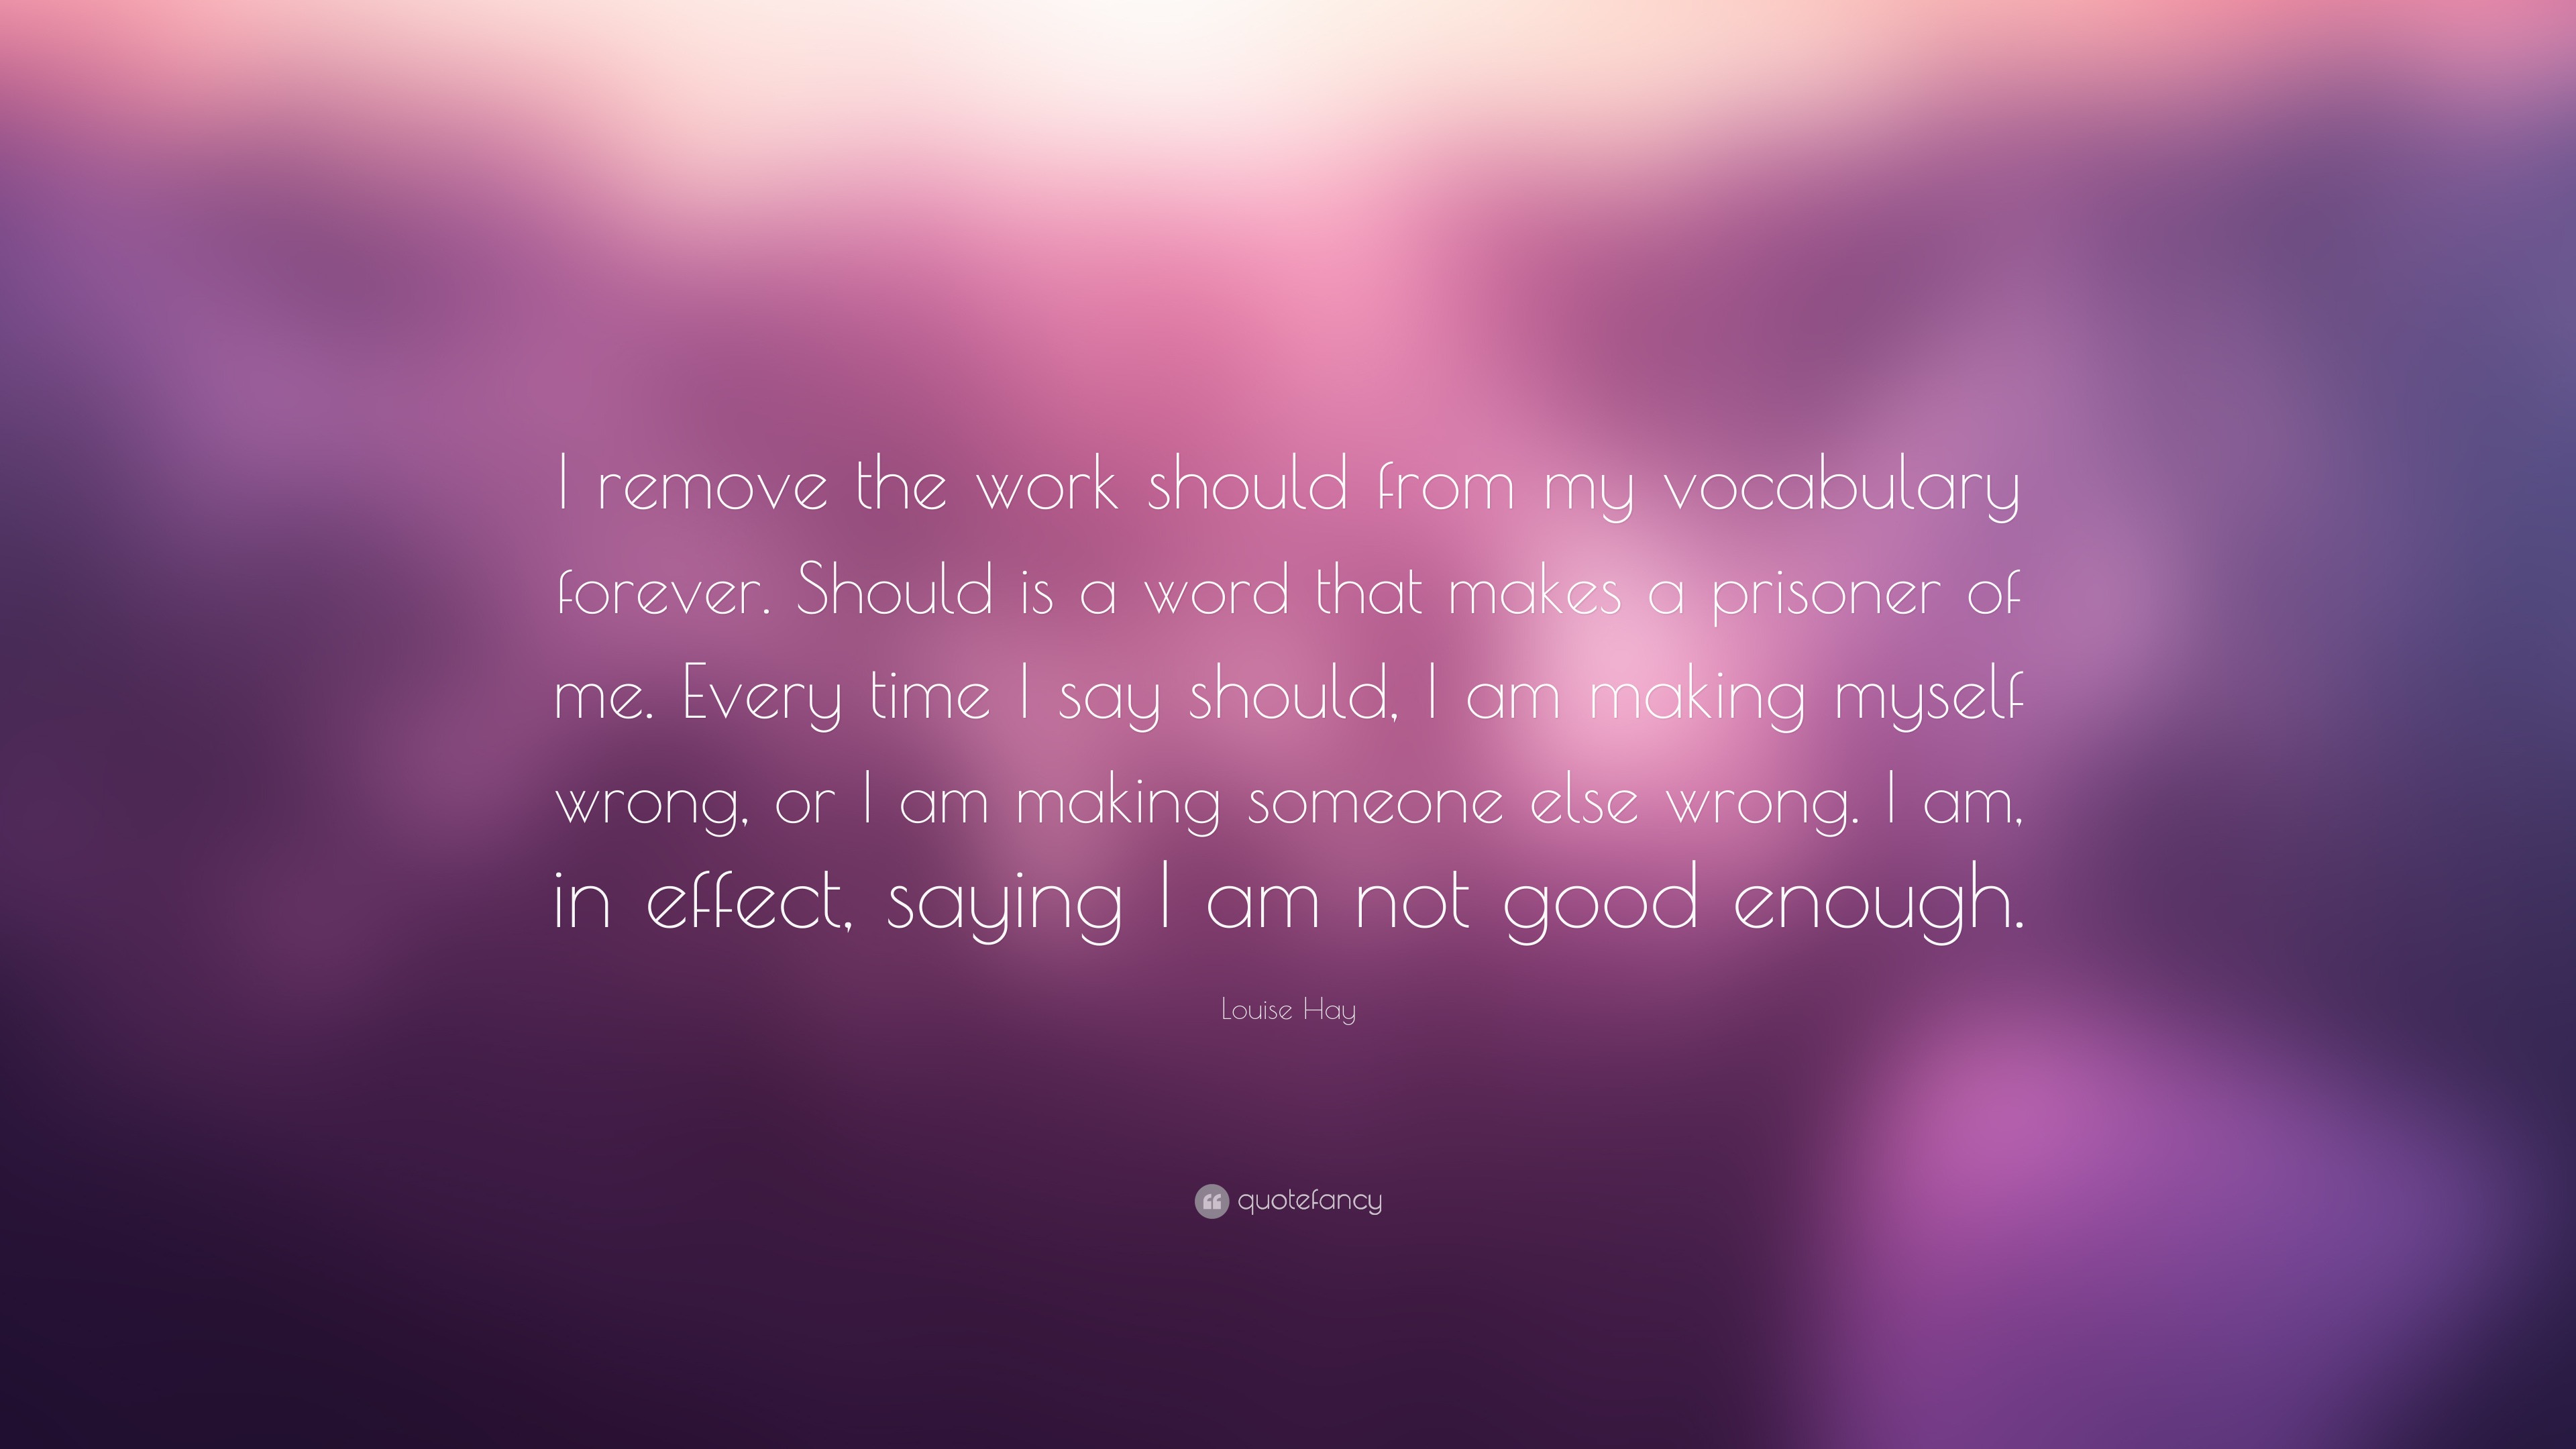 Louise Hay Quote: “I remove the work should from my vocabulary forever ...